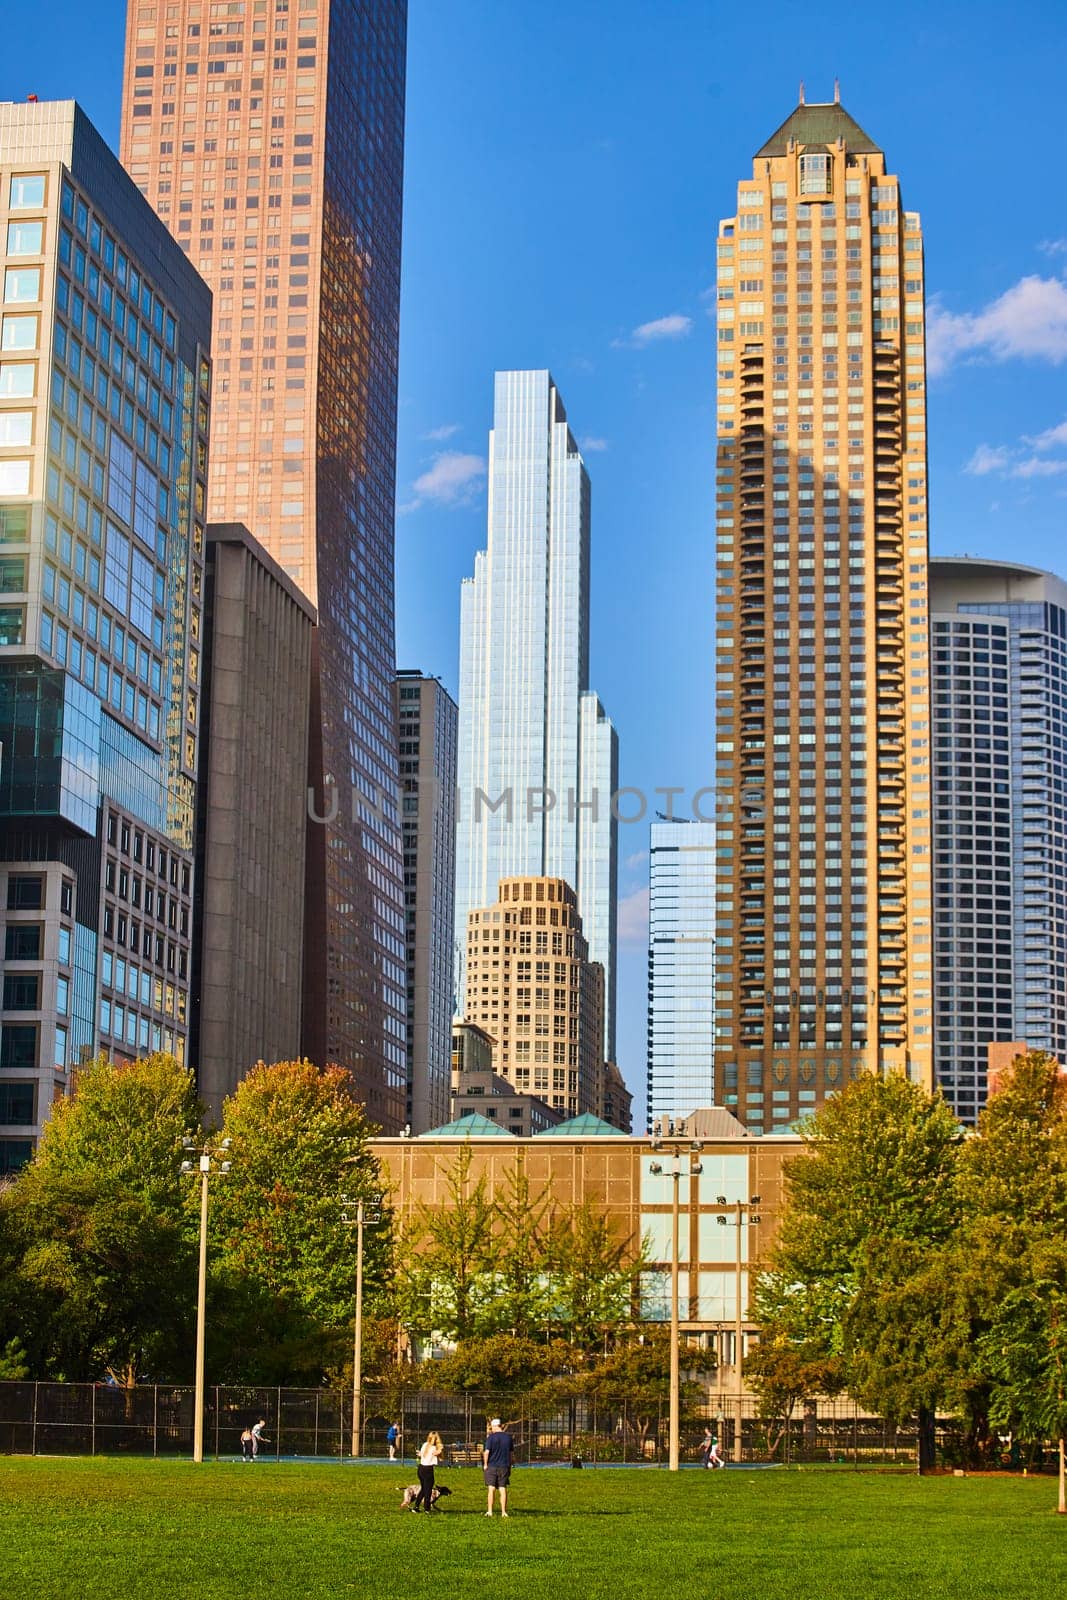 Image of Park on sunny day in inner city Chicago with bright, golden skyscrapers and blue sky